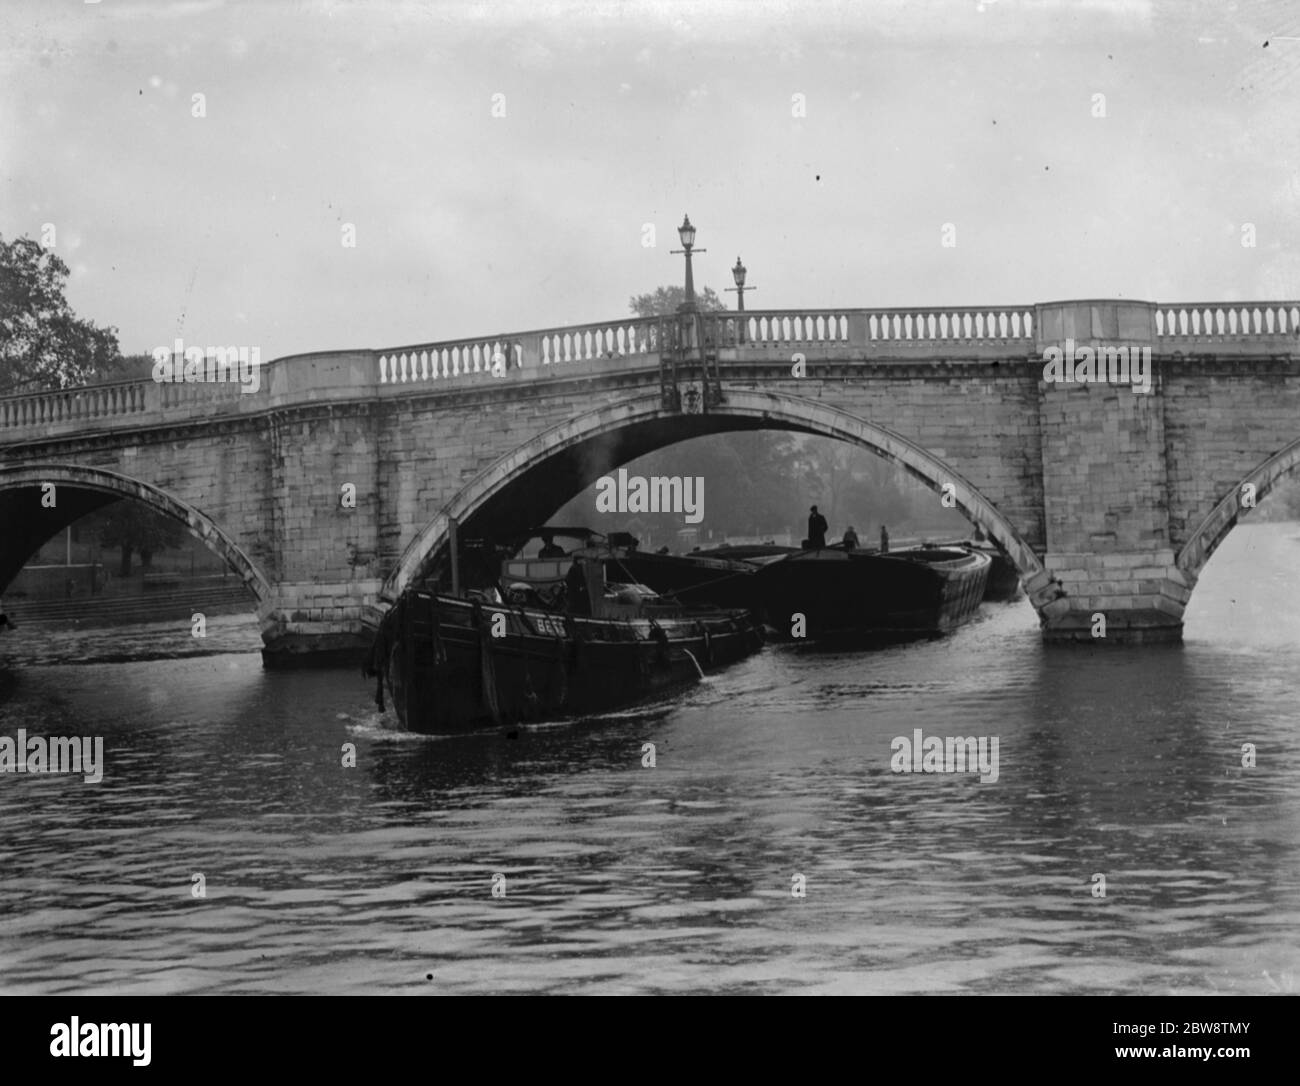 Association of Master Lightermen and Barge Owners have placed an applications for the repair of Richmond Bridge on the river Thames in London . Photos shows a tug towing a barge under the Richmond Bridge . 1936 26 October 1936 Stock Photo